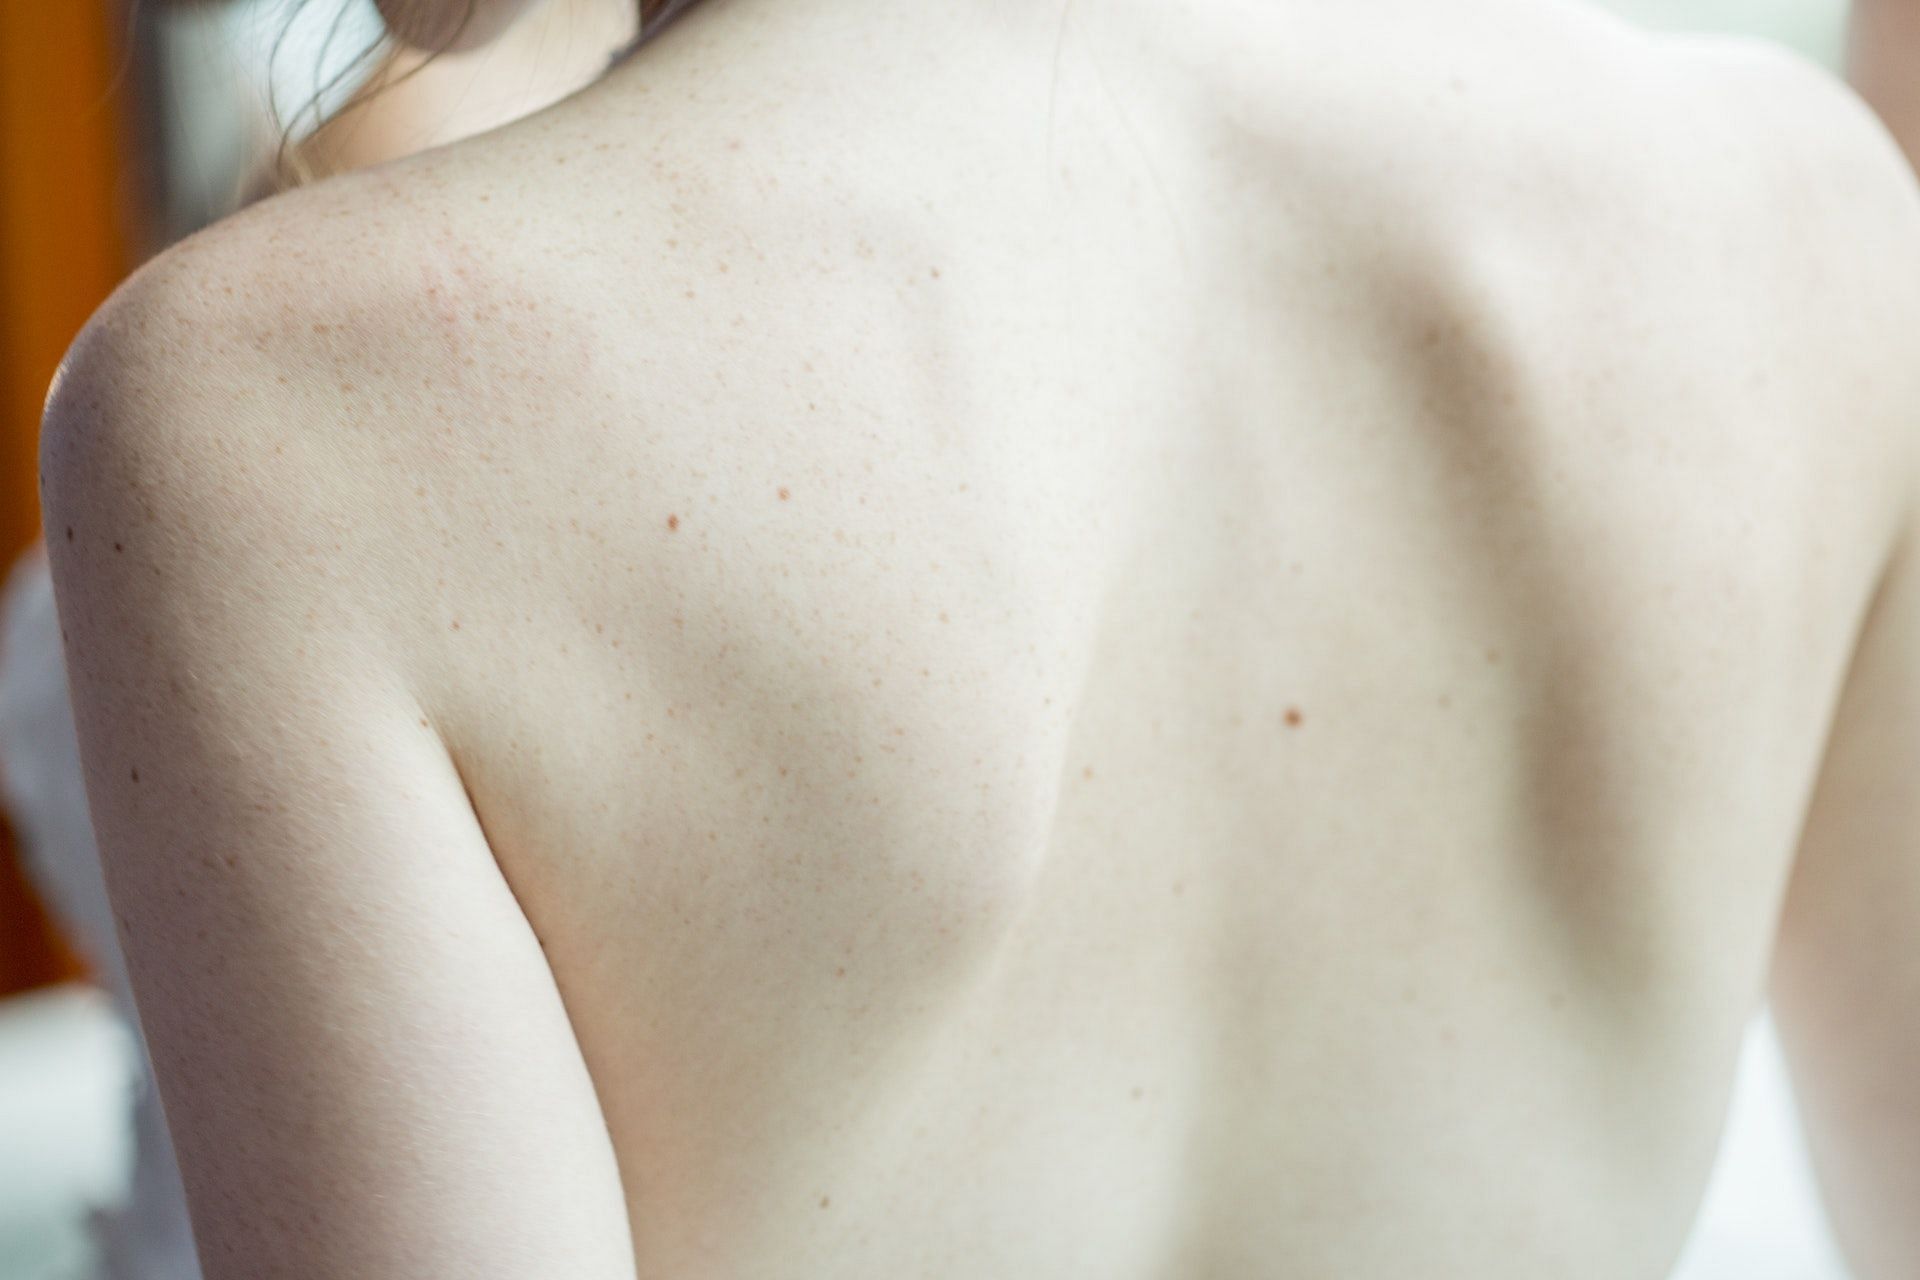 Your skin will return to its normal color. (Photo via Pexels/NEOSiAM 2021)